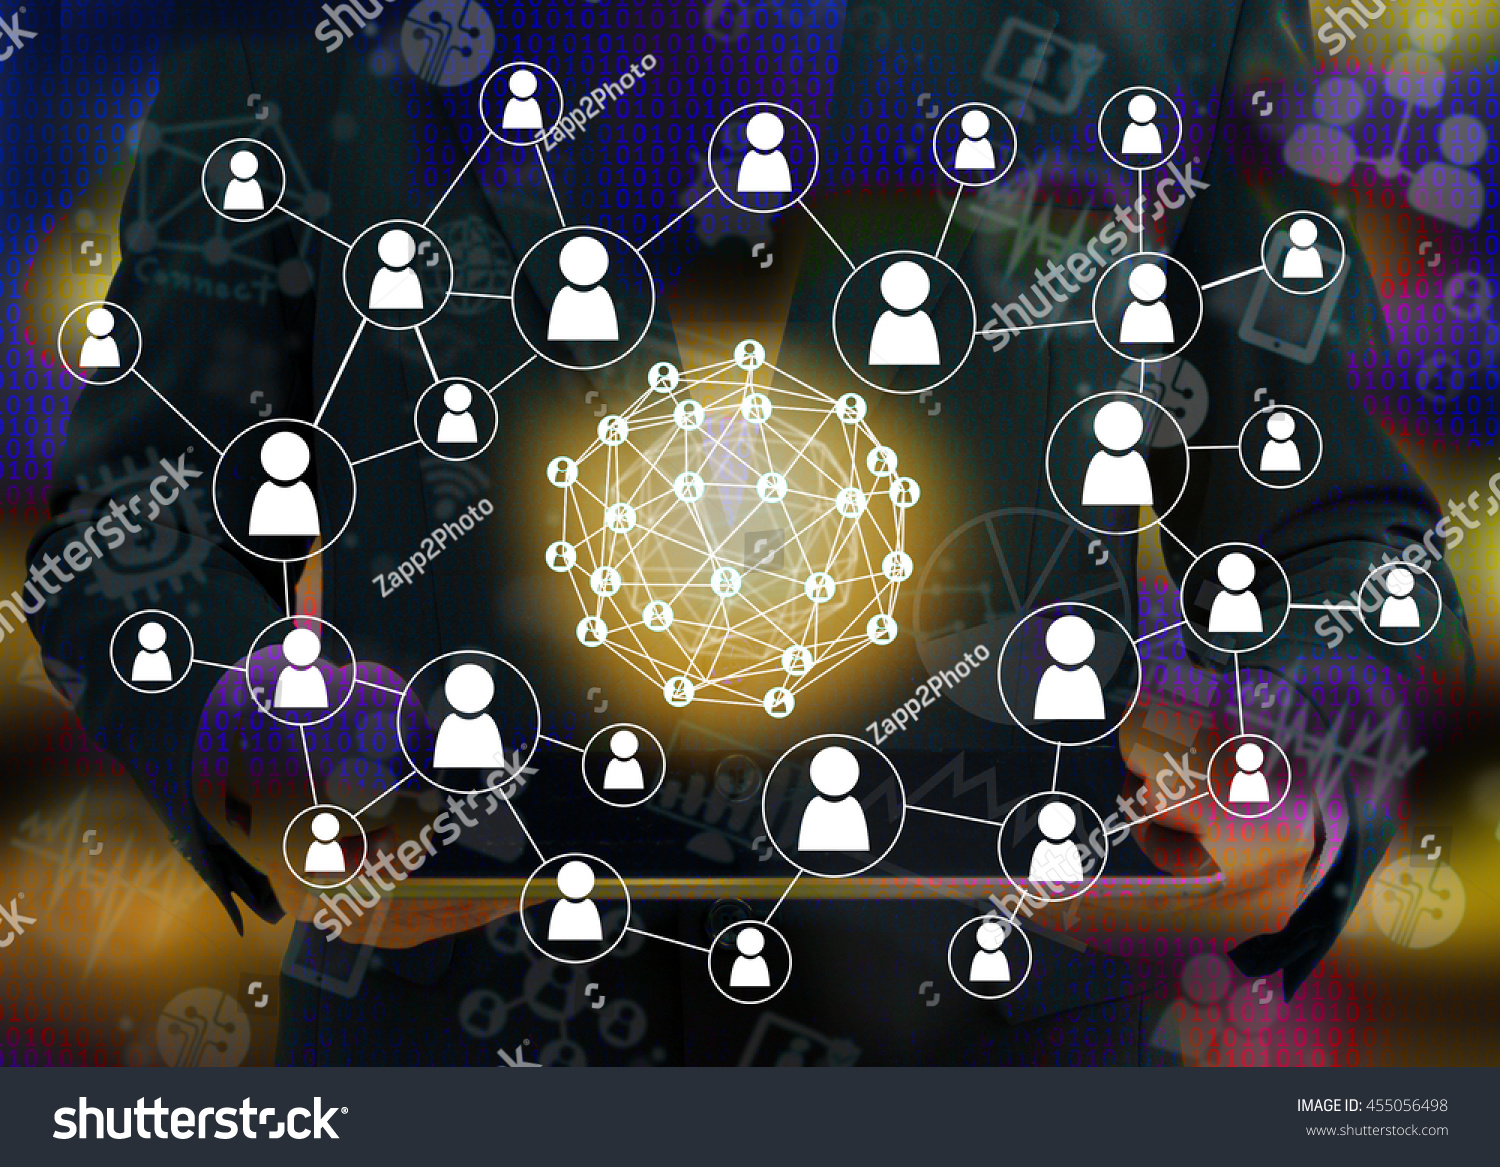 Fintech and Peer-to-peer payment concept. Peer-to-peer payment network icons with abstract man suit holding tablet and digital binary code background. #455056498